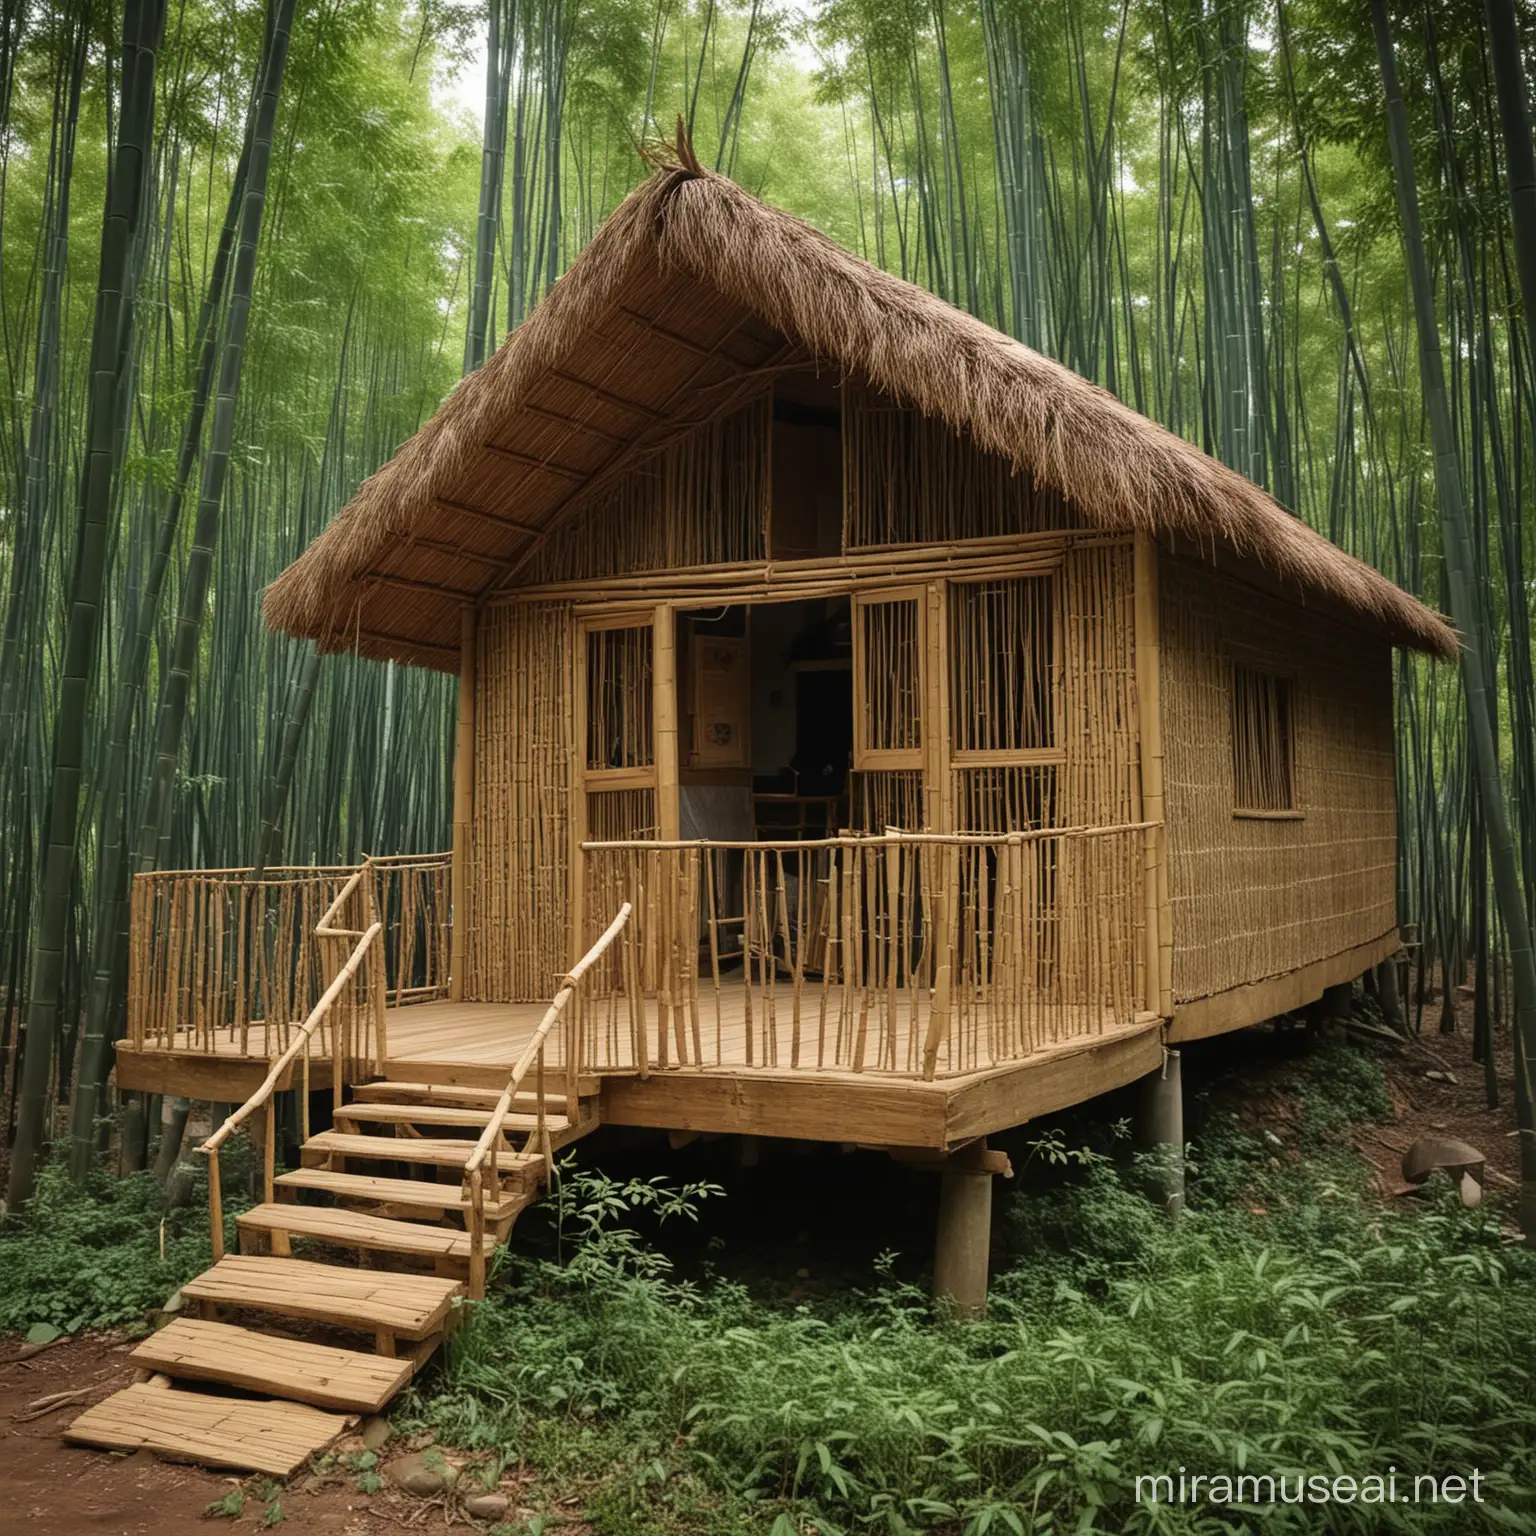 Eid Celebration at a Serene Bamboo House in the Forest